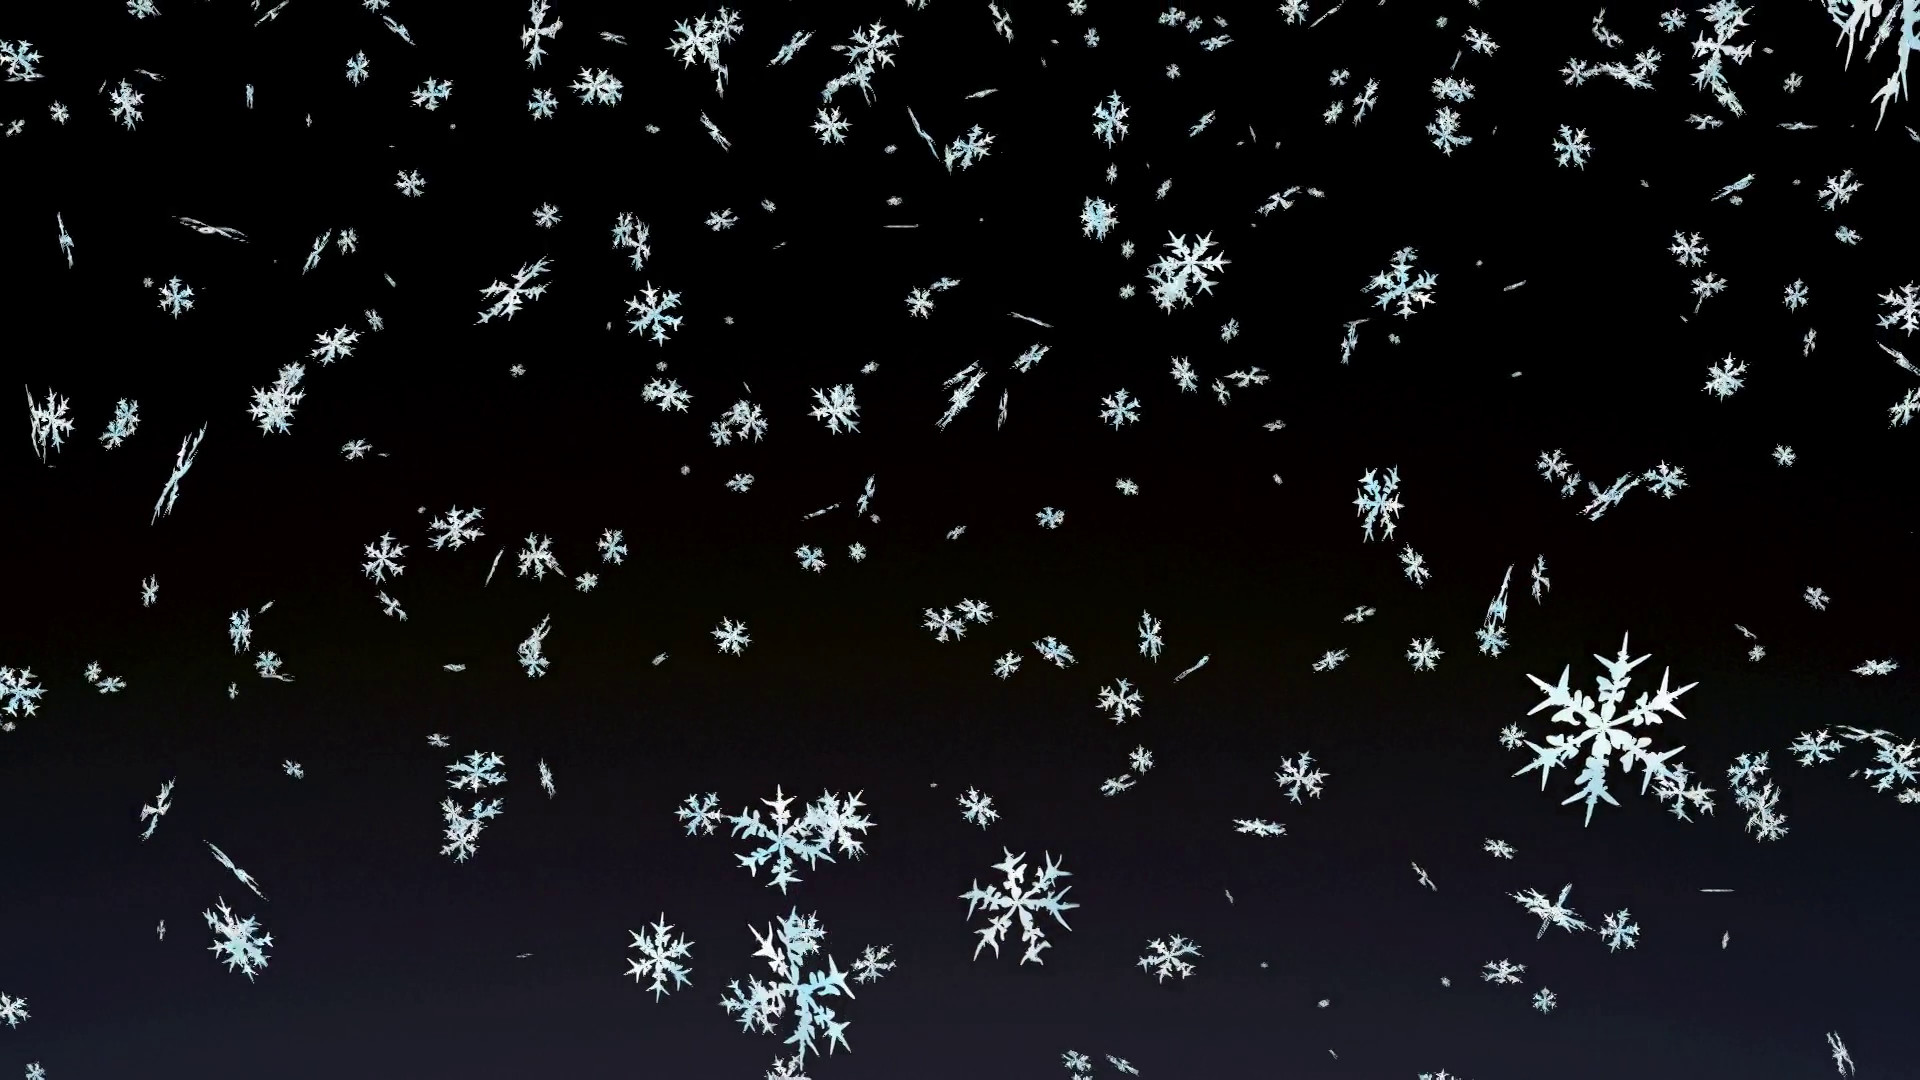 1920x1080 Animated falling snow flakes with slightly frosty light blue texture on  each flake. Nigh sky background. Sky color ranges from black to dark blue  to imitate ...